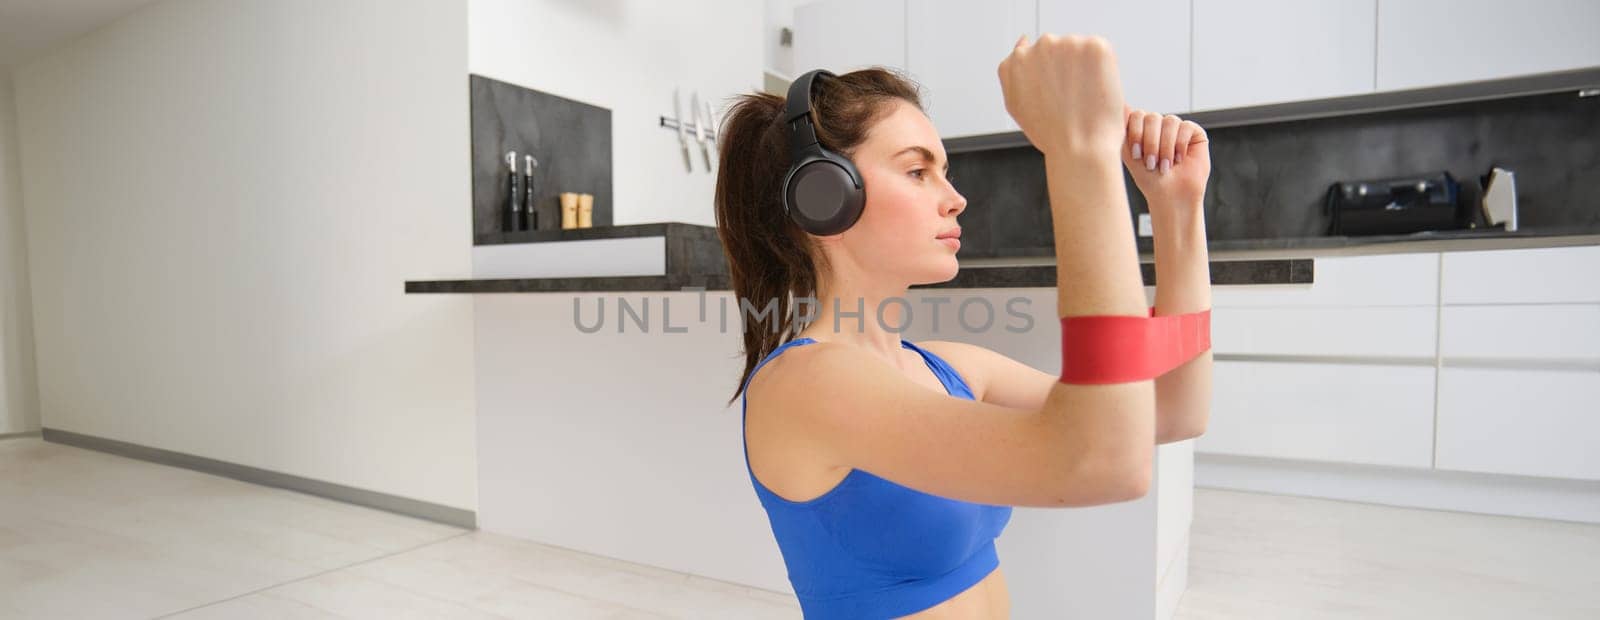 Focused sportswoman workout at home, using elastic resistance band on arms, stretching exercises in living room, aerobics training by Benzoix